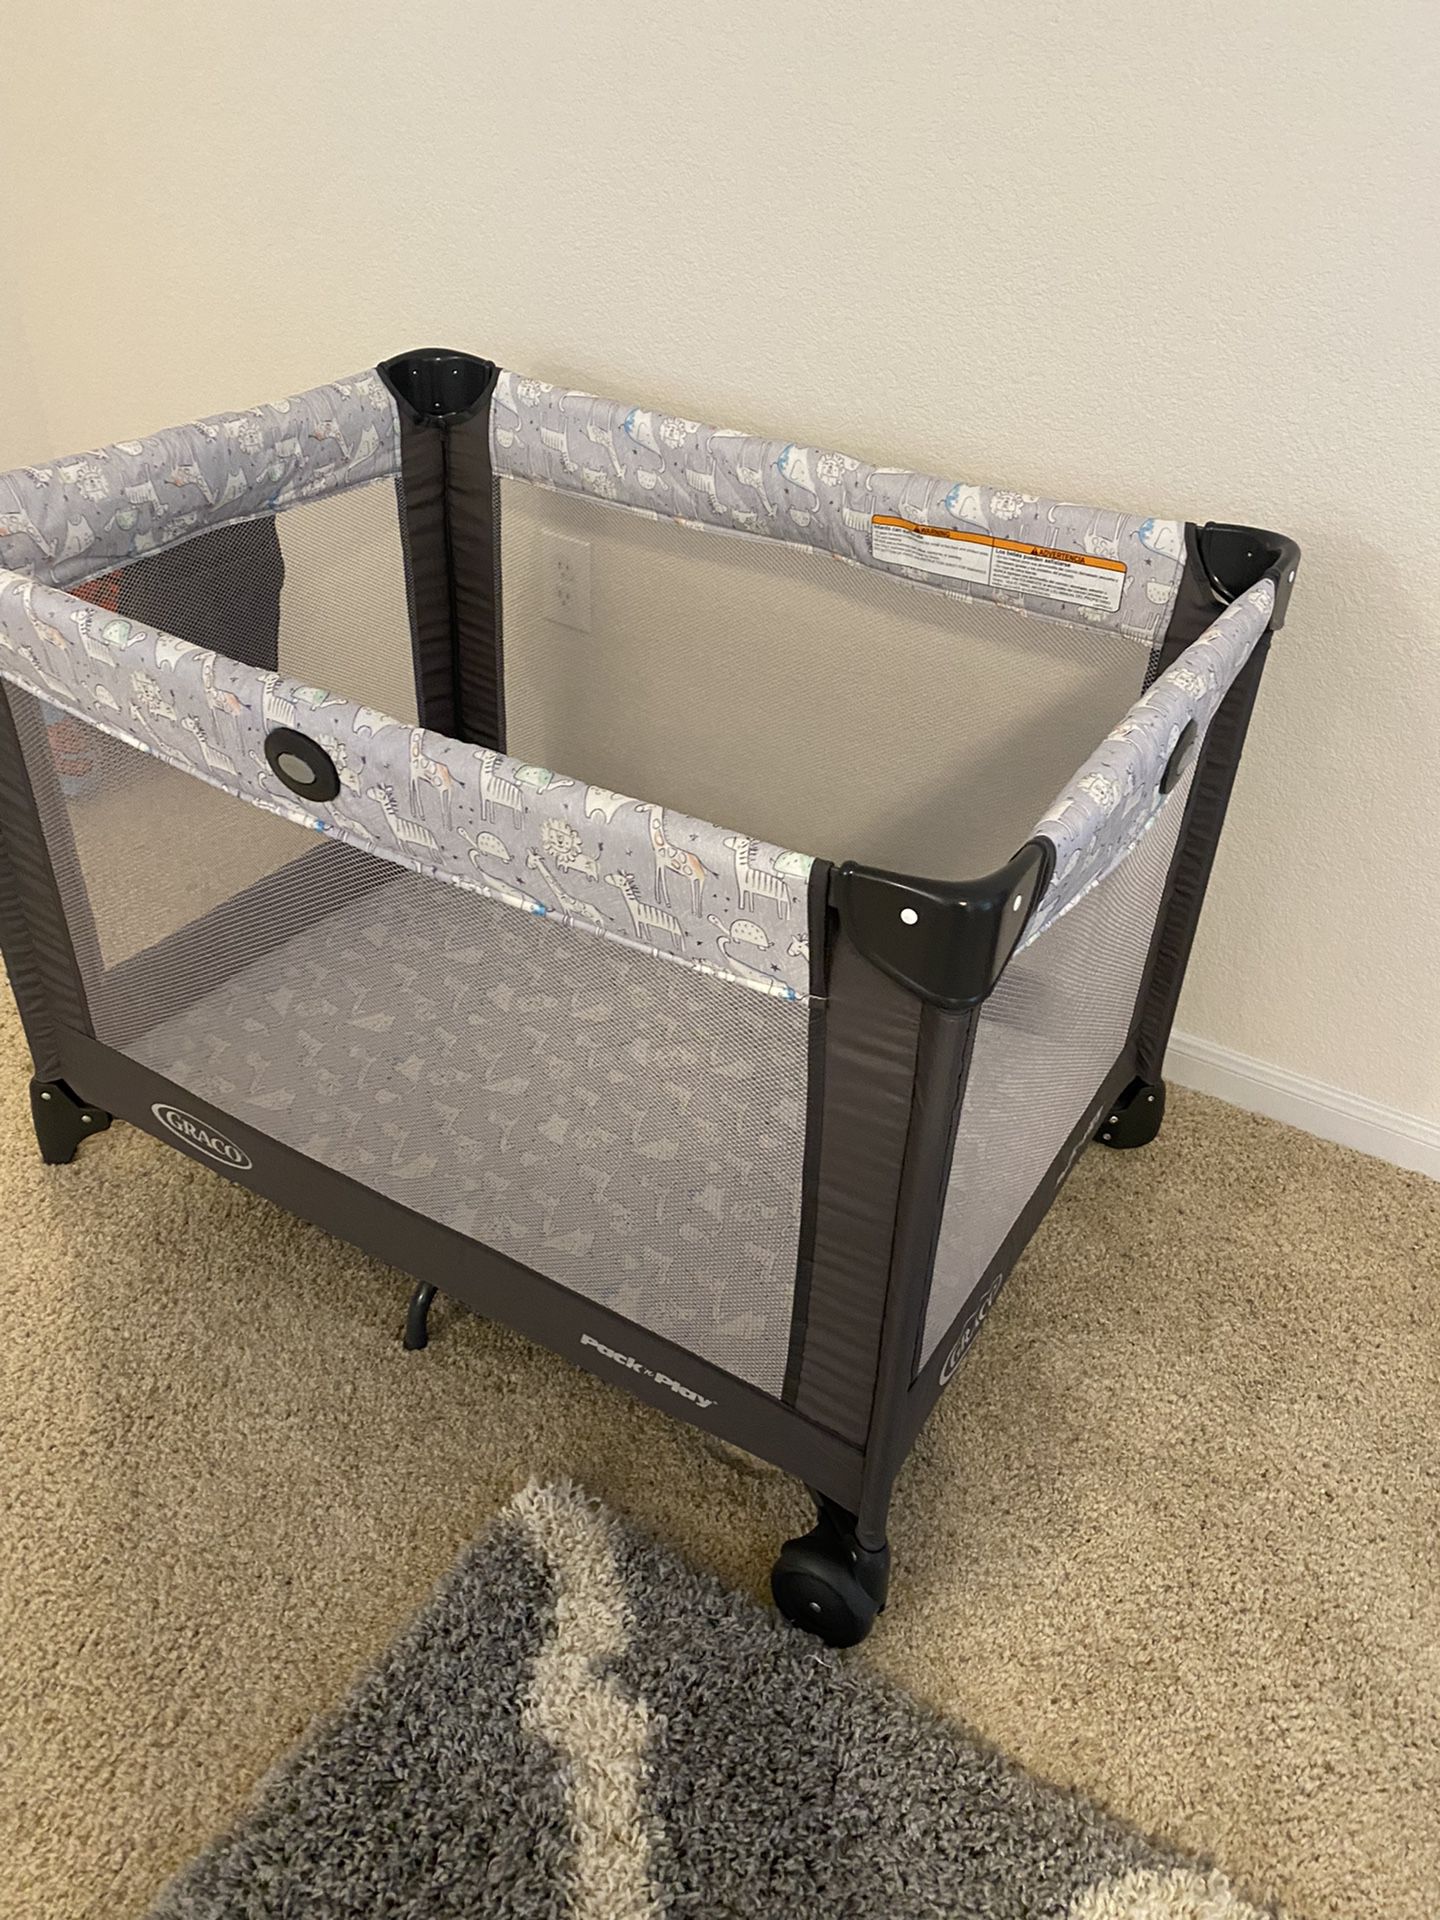 Graco pack and play